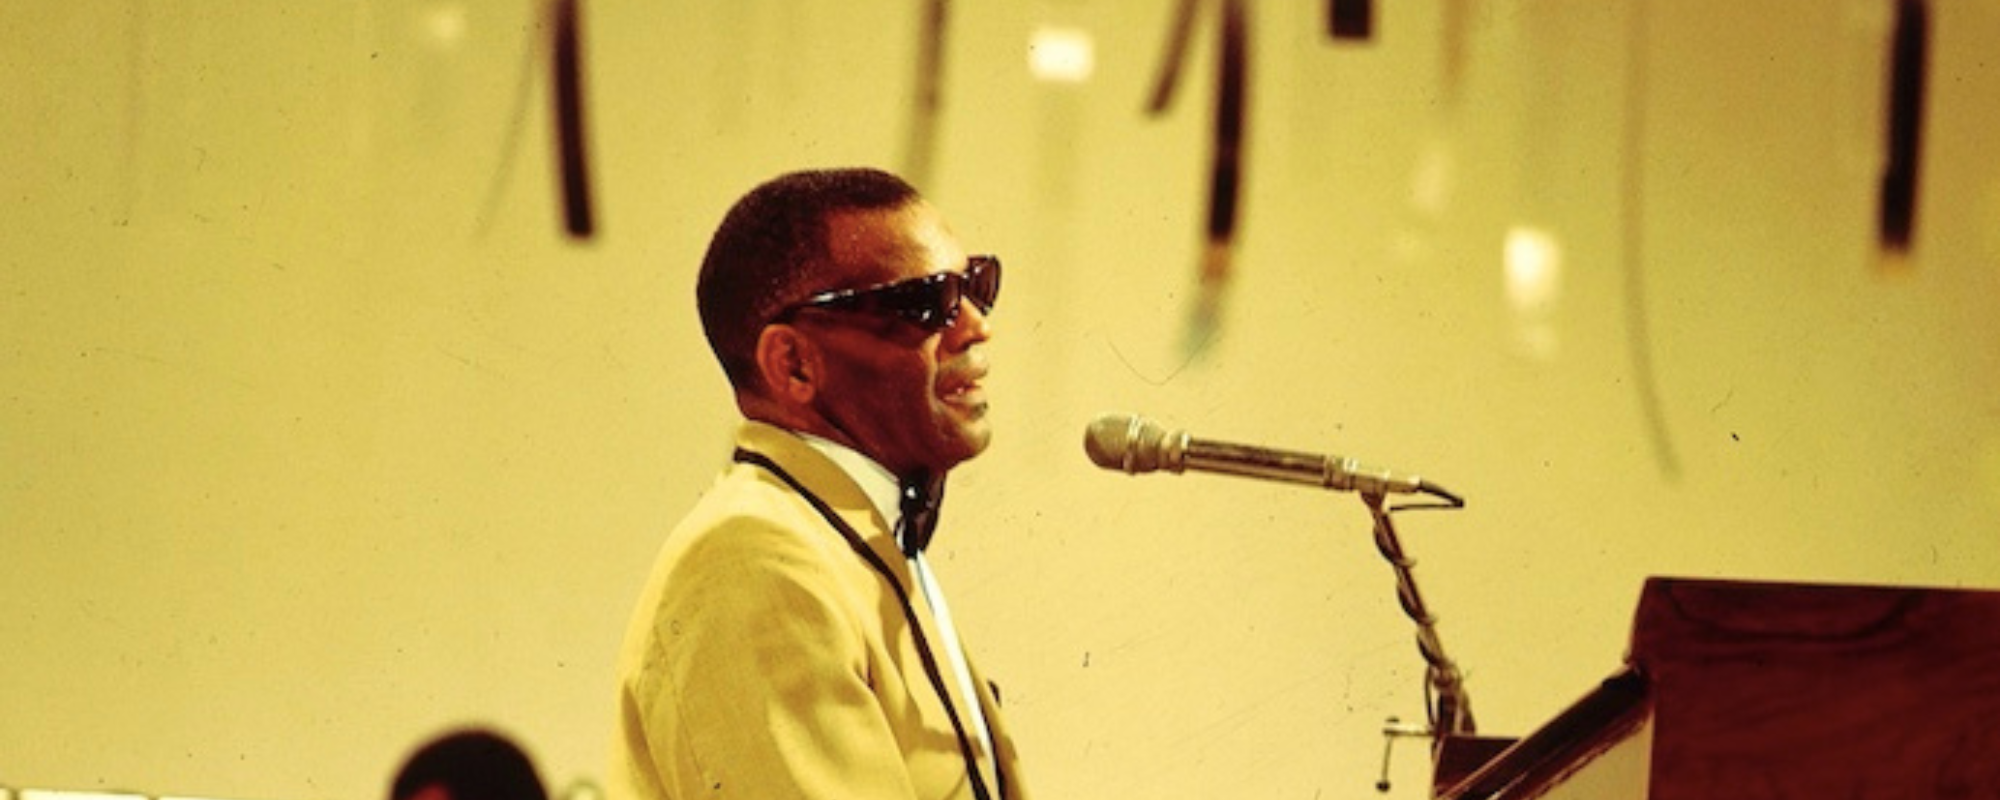 3 Movies Every Ray Charles Fan Should Watch